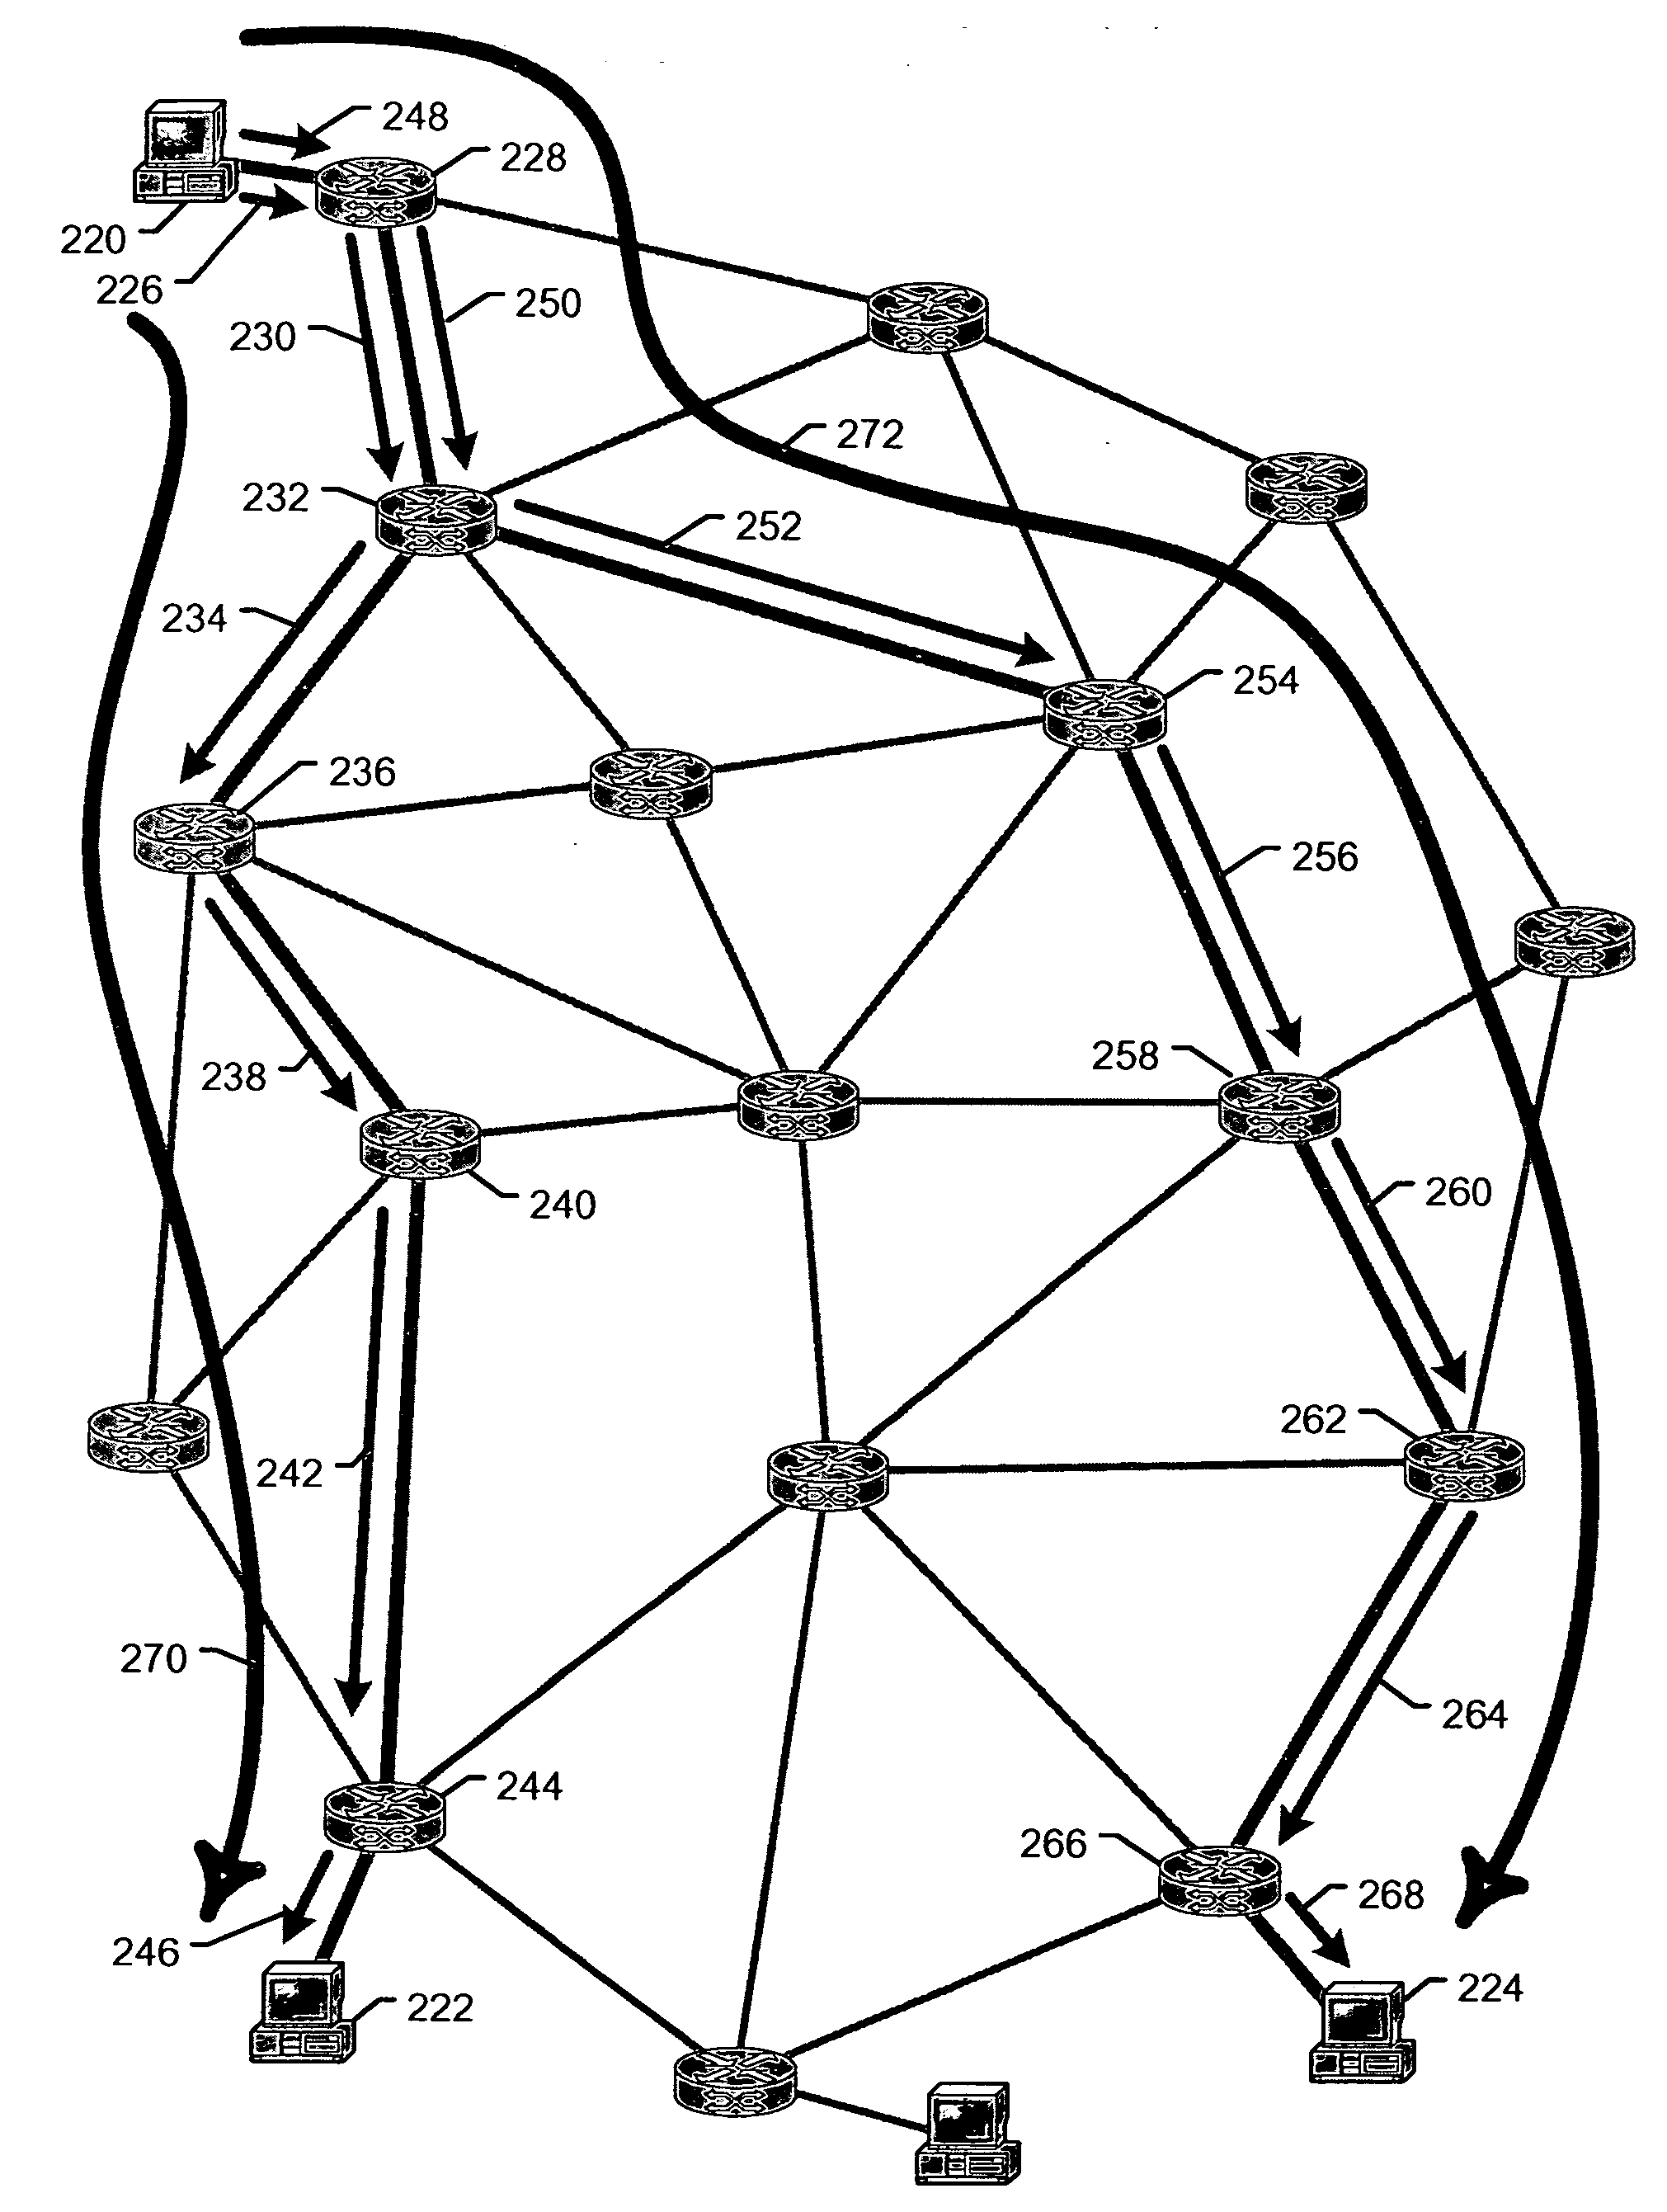 System and method of implementing contacts of small worlds in packet communication networks